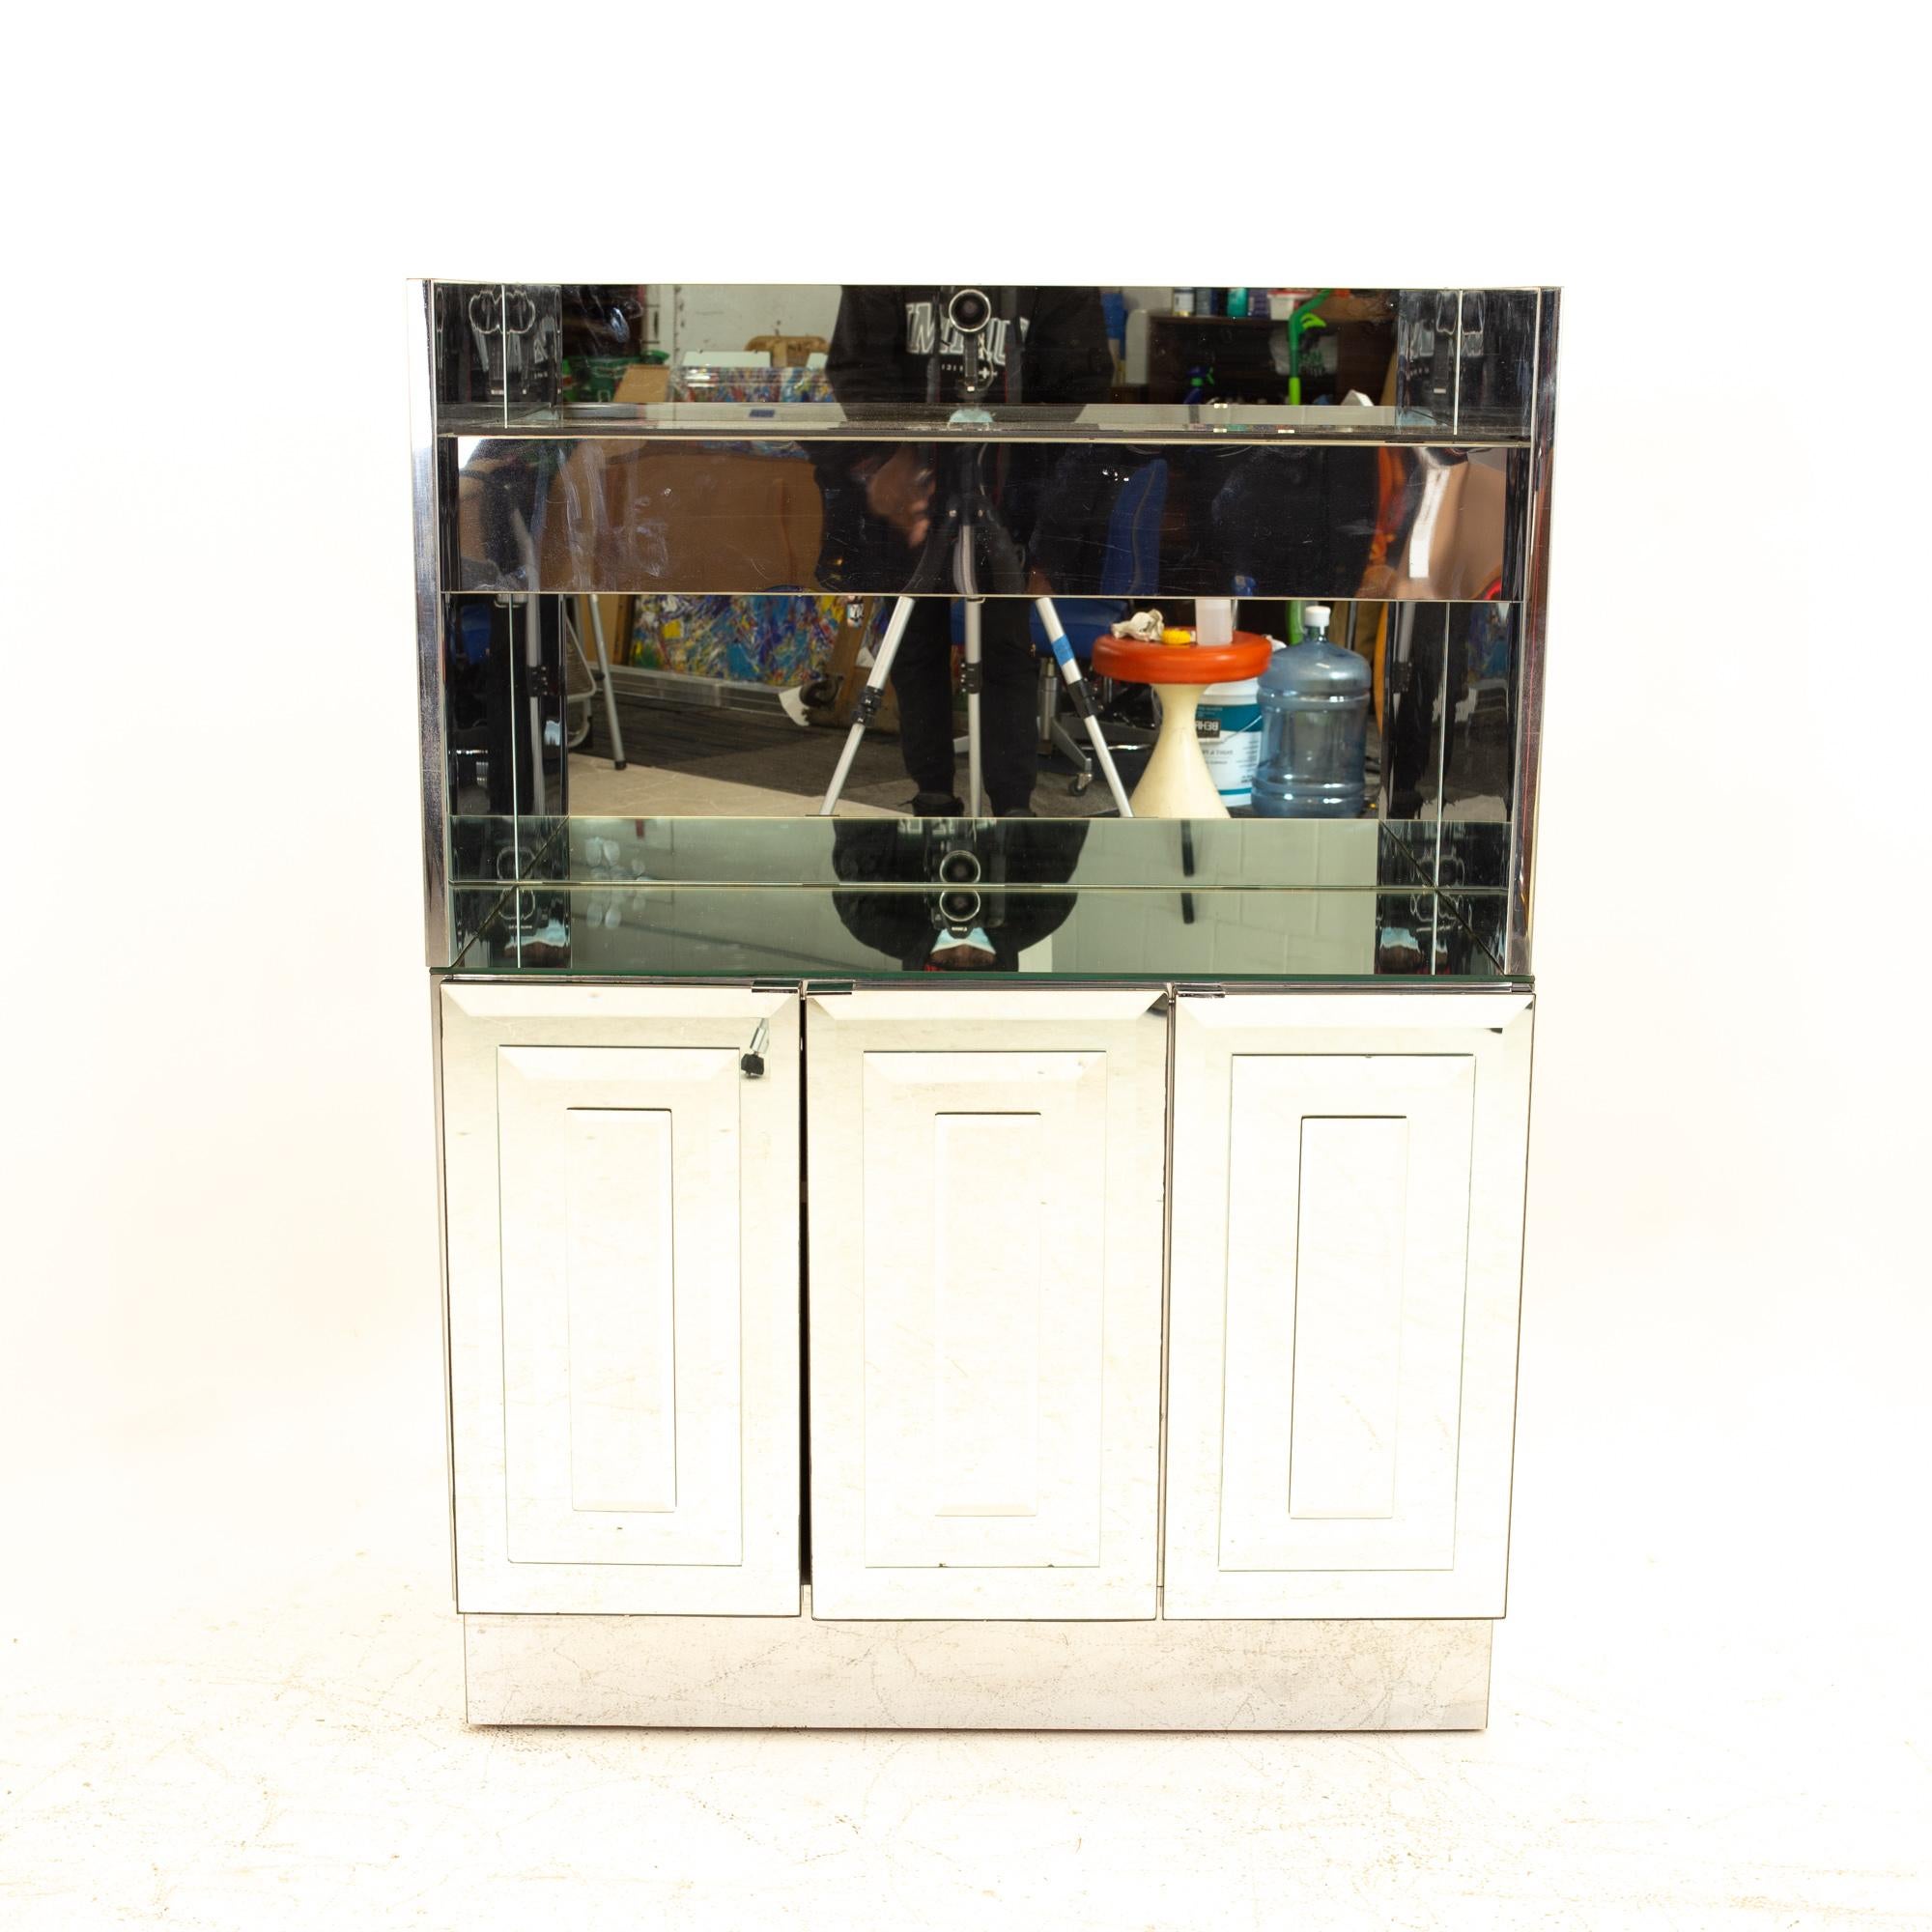 Ello Skycraper Mid Century mirrored bar cabinet
Cabinet measures: 36 wide x 17 deep x 28 high

All pieces of furniture can be had in what we call restored vintage condition. That means the piece is restored upon purchase so it’s free of watermarks,